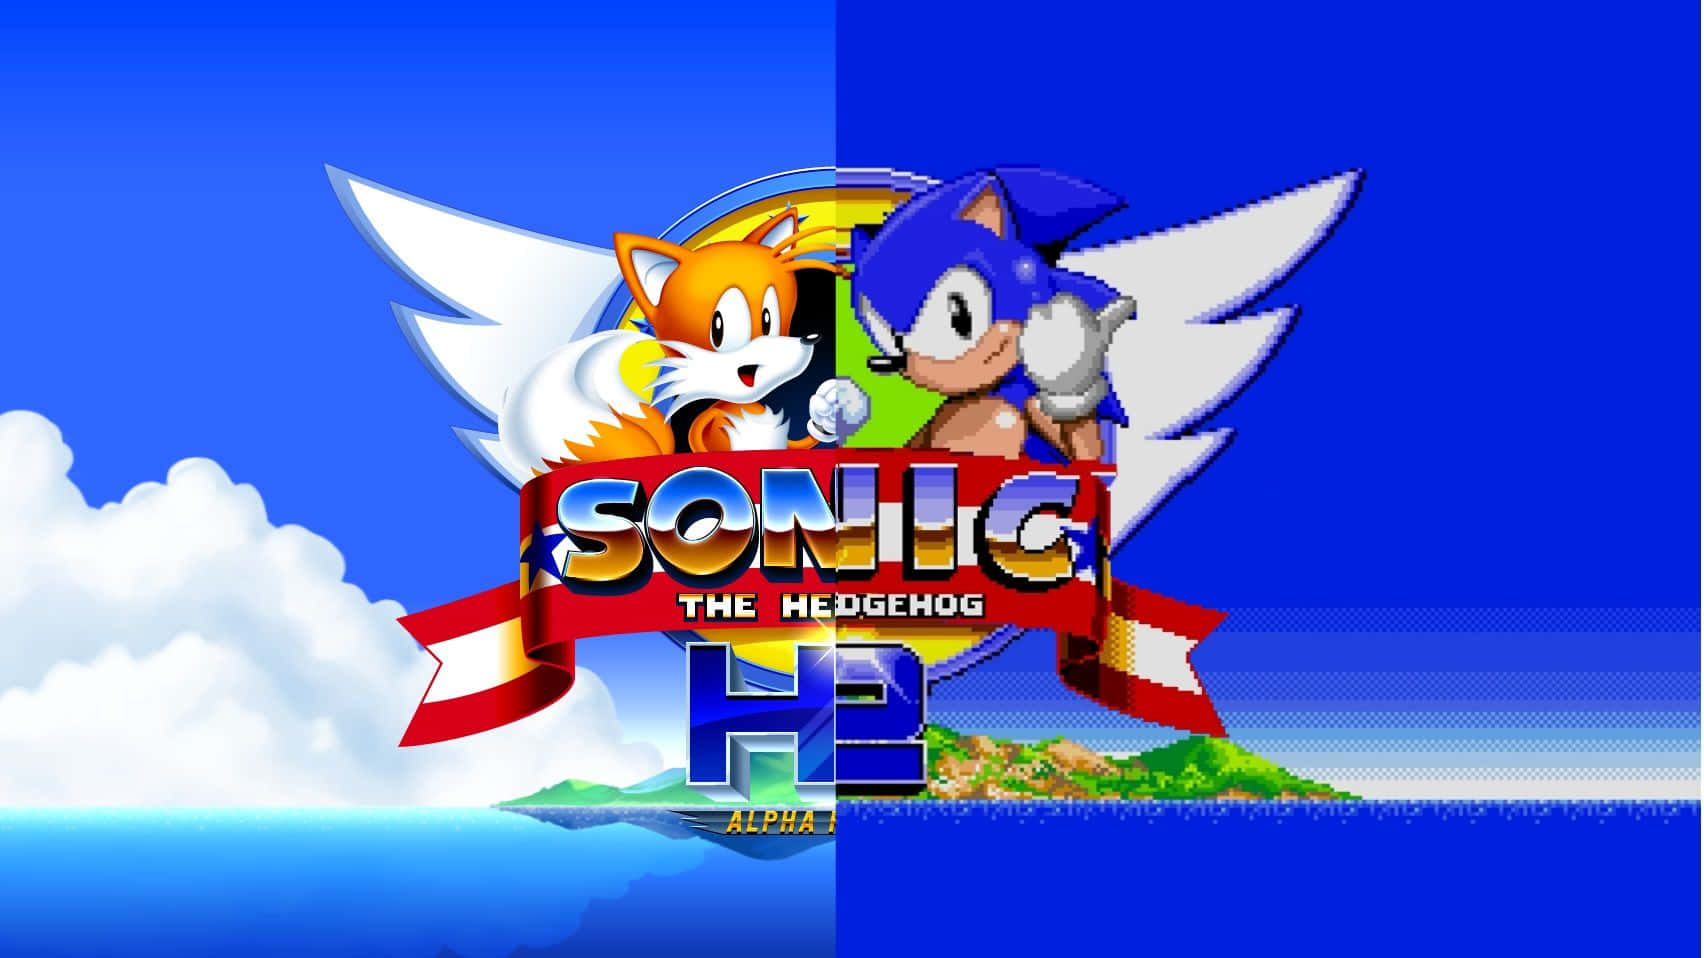 Fly through the loops of the adventurous Emerald Hill zone in Sonic 2!